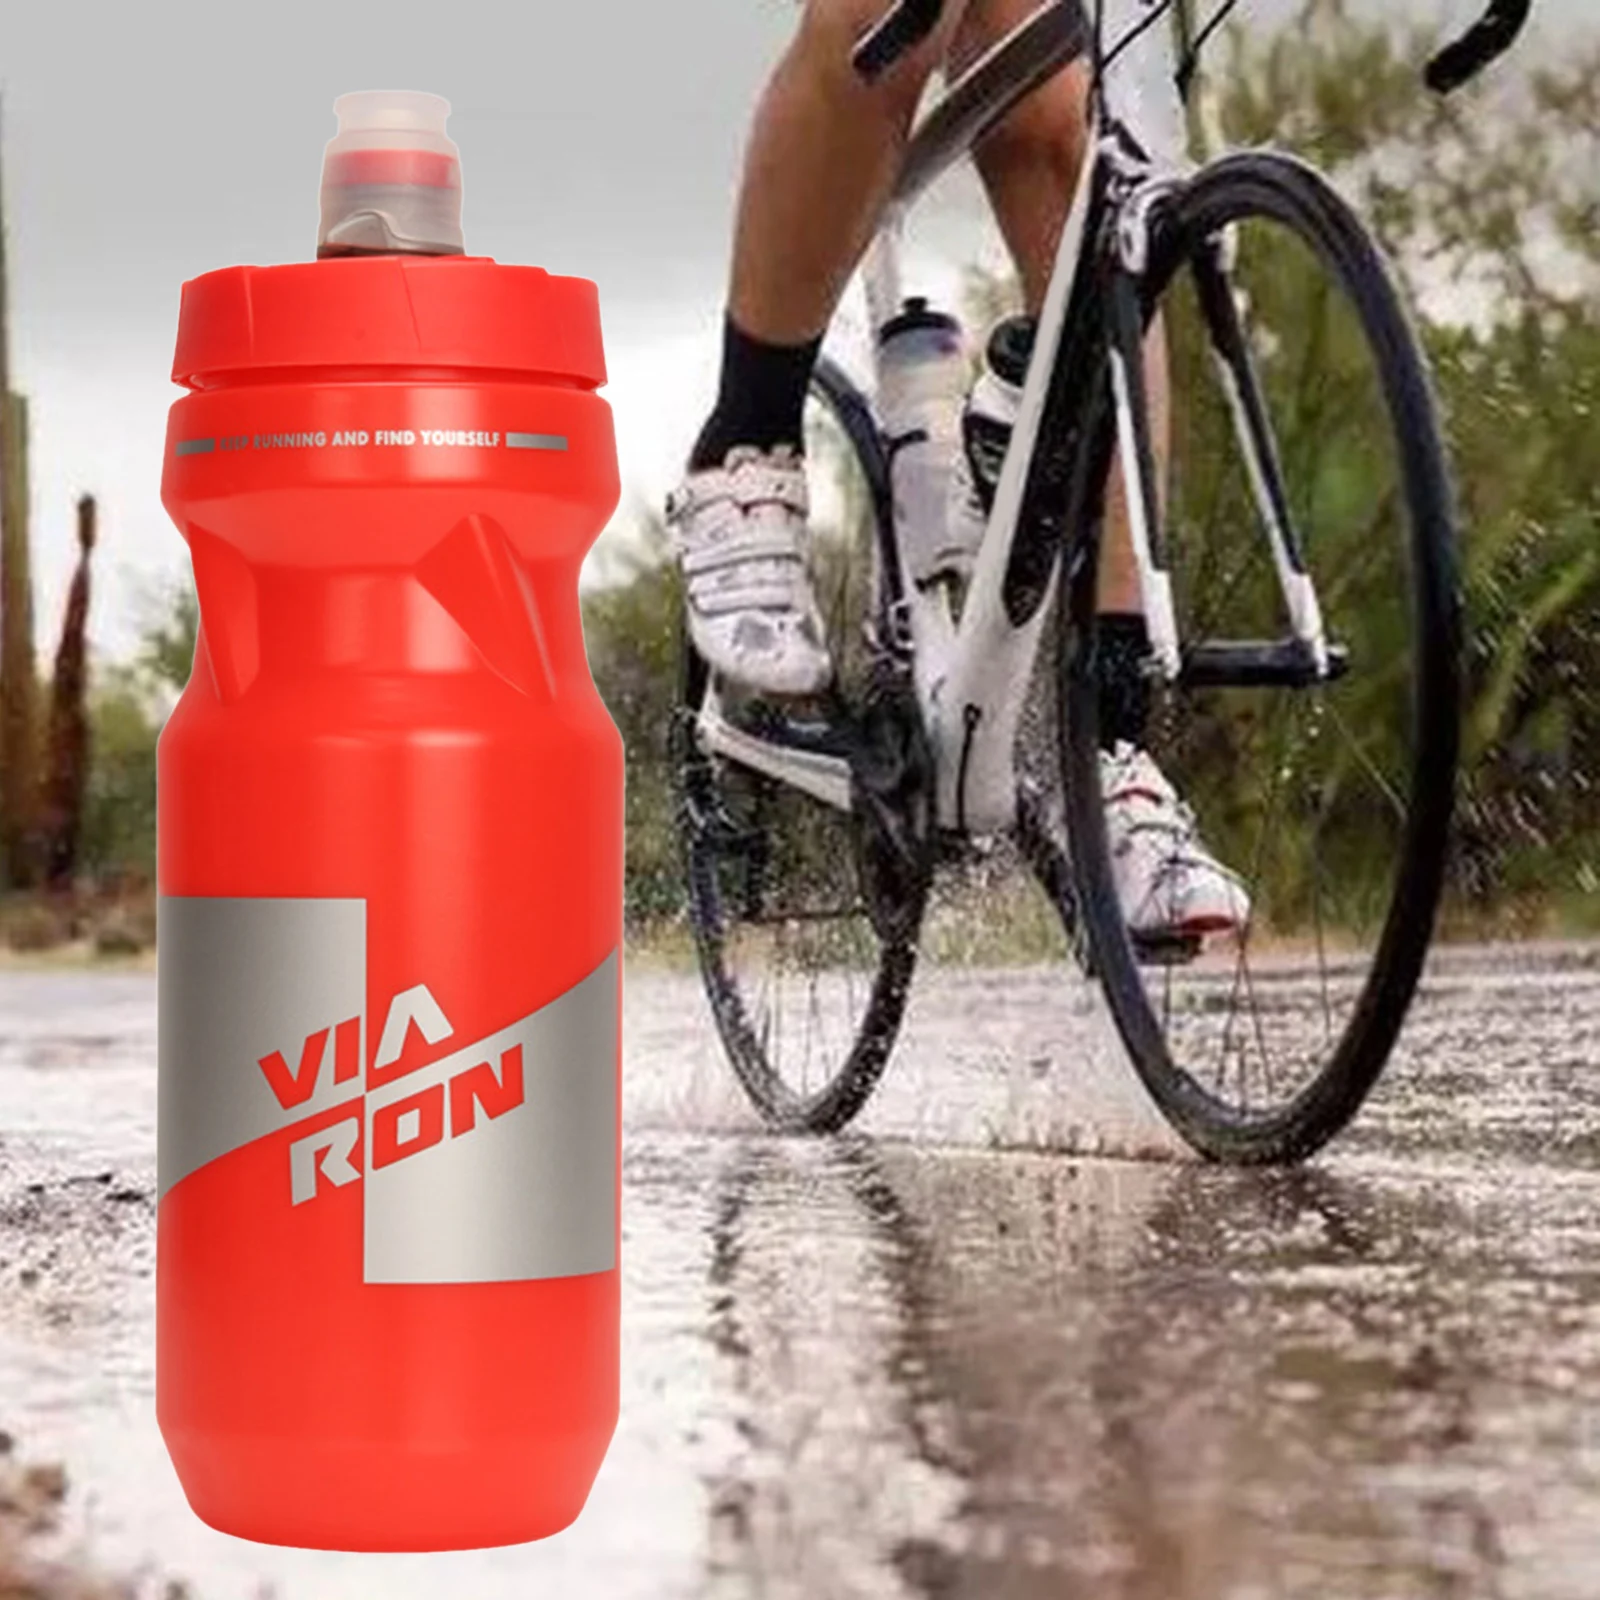 650ml Squeeze PP Sport Water Bottle Sport for Bicycle Workout Fitness Road Bike Mountain Bike Lightweight